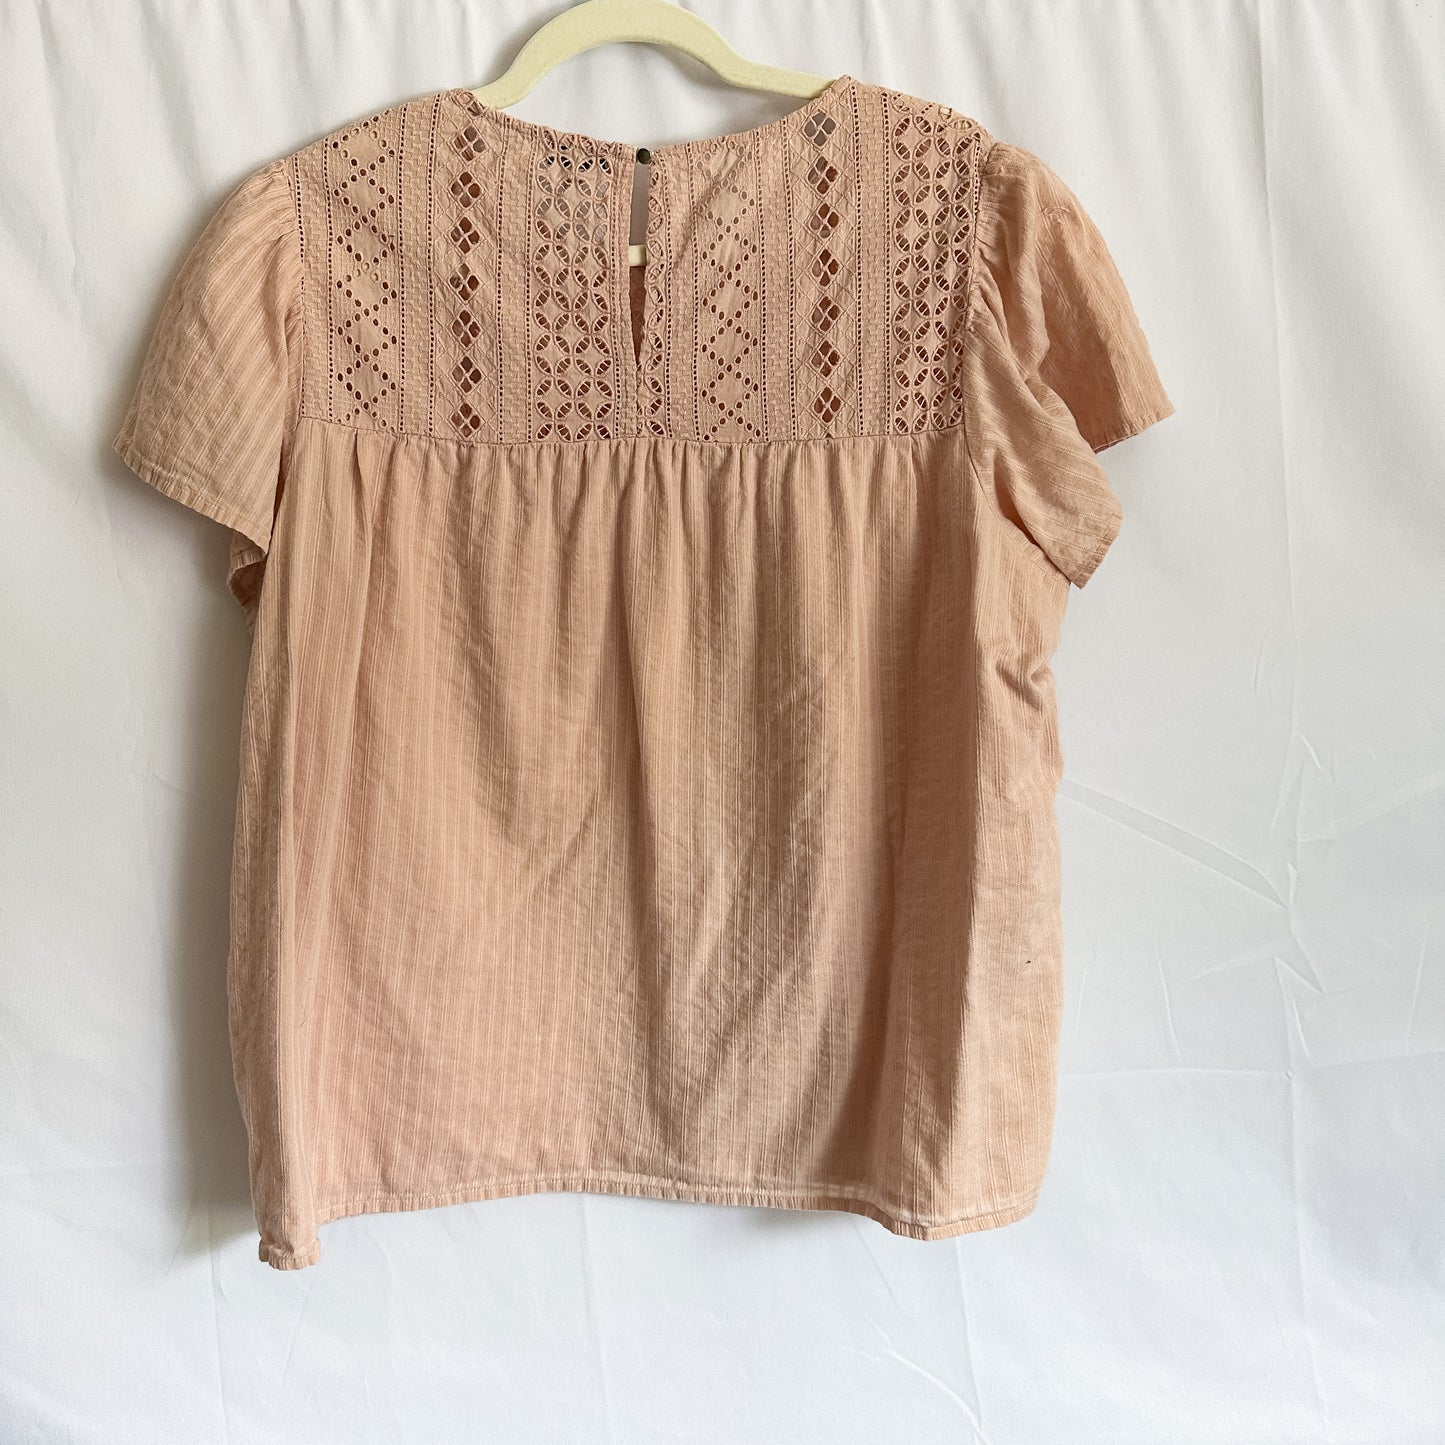 Pink Embroidered Eyelet Short Sleeve Top (fits XL)